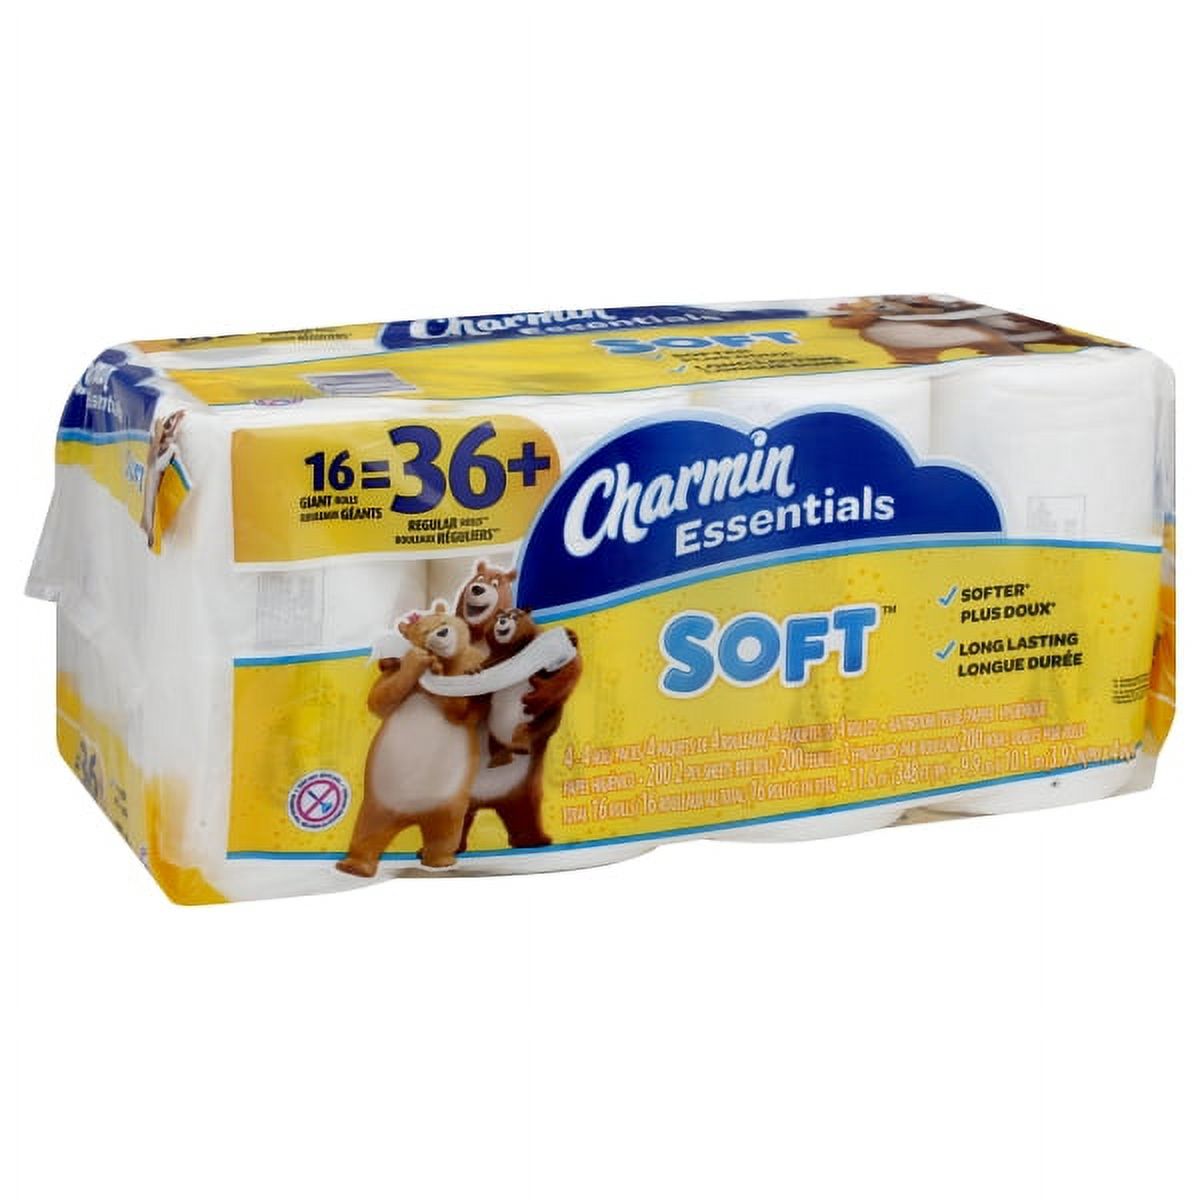 Charmin Essentials Soft Bathroom Tissue, 2-Ply, 4 x 3.92, 200/Roll, 16 Roll/Pack - image 1 of 5